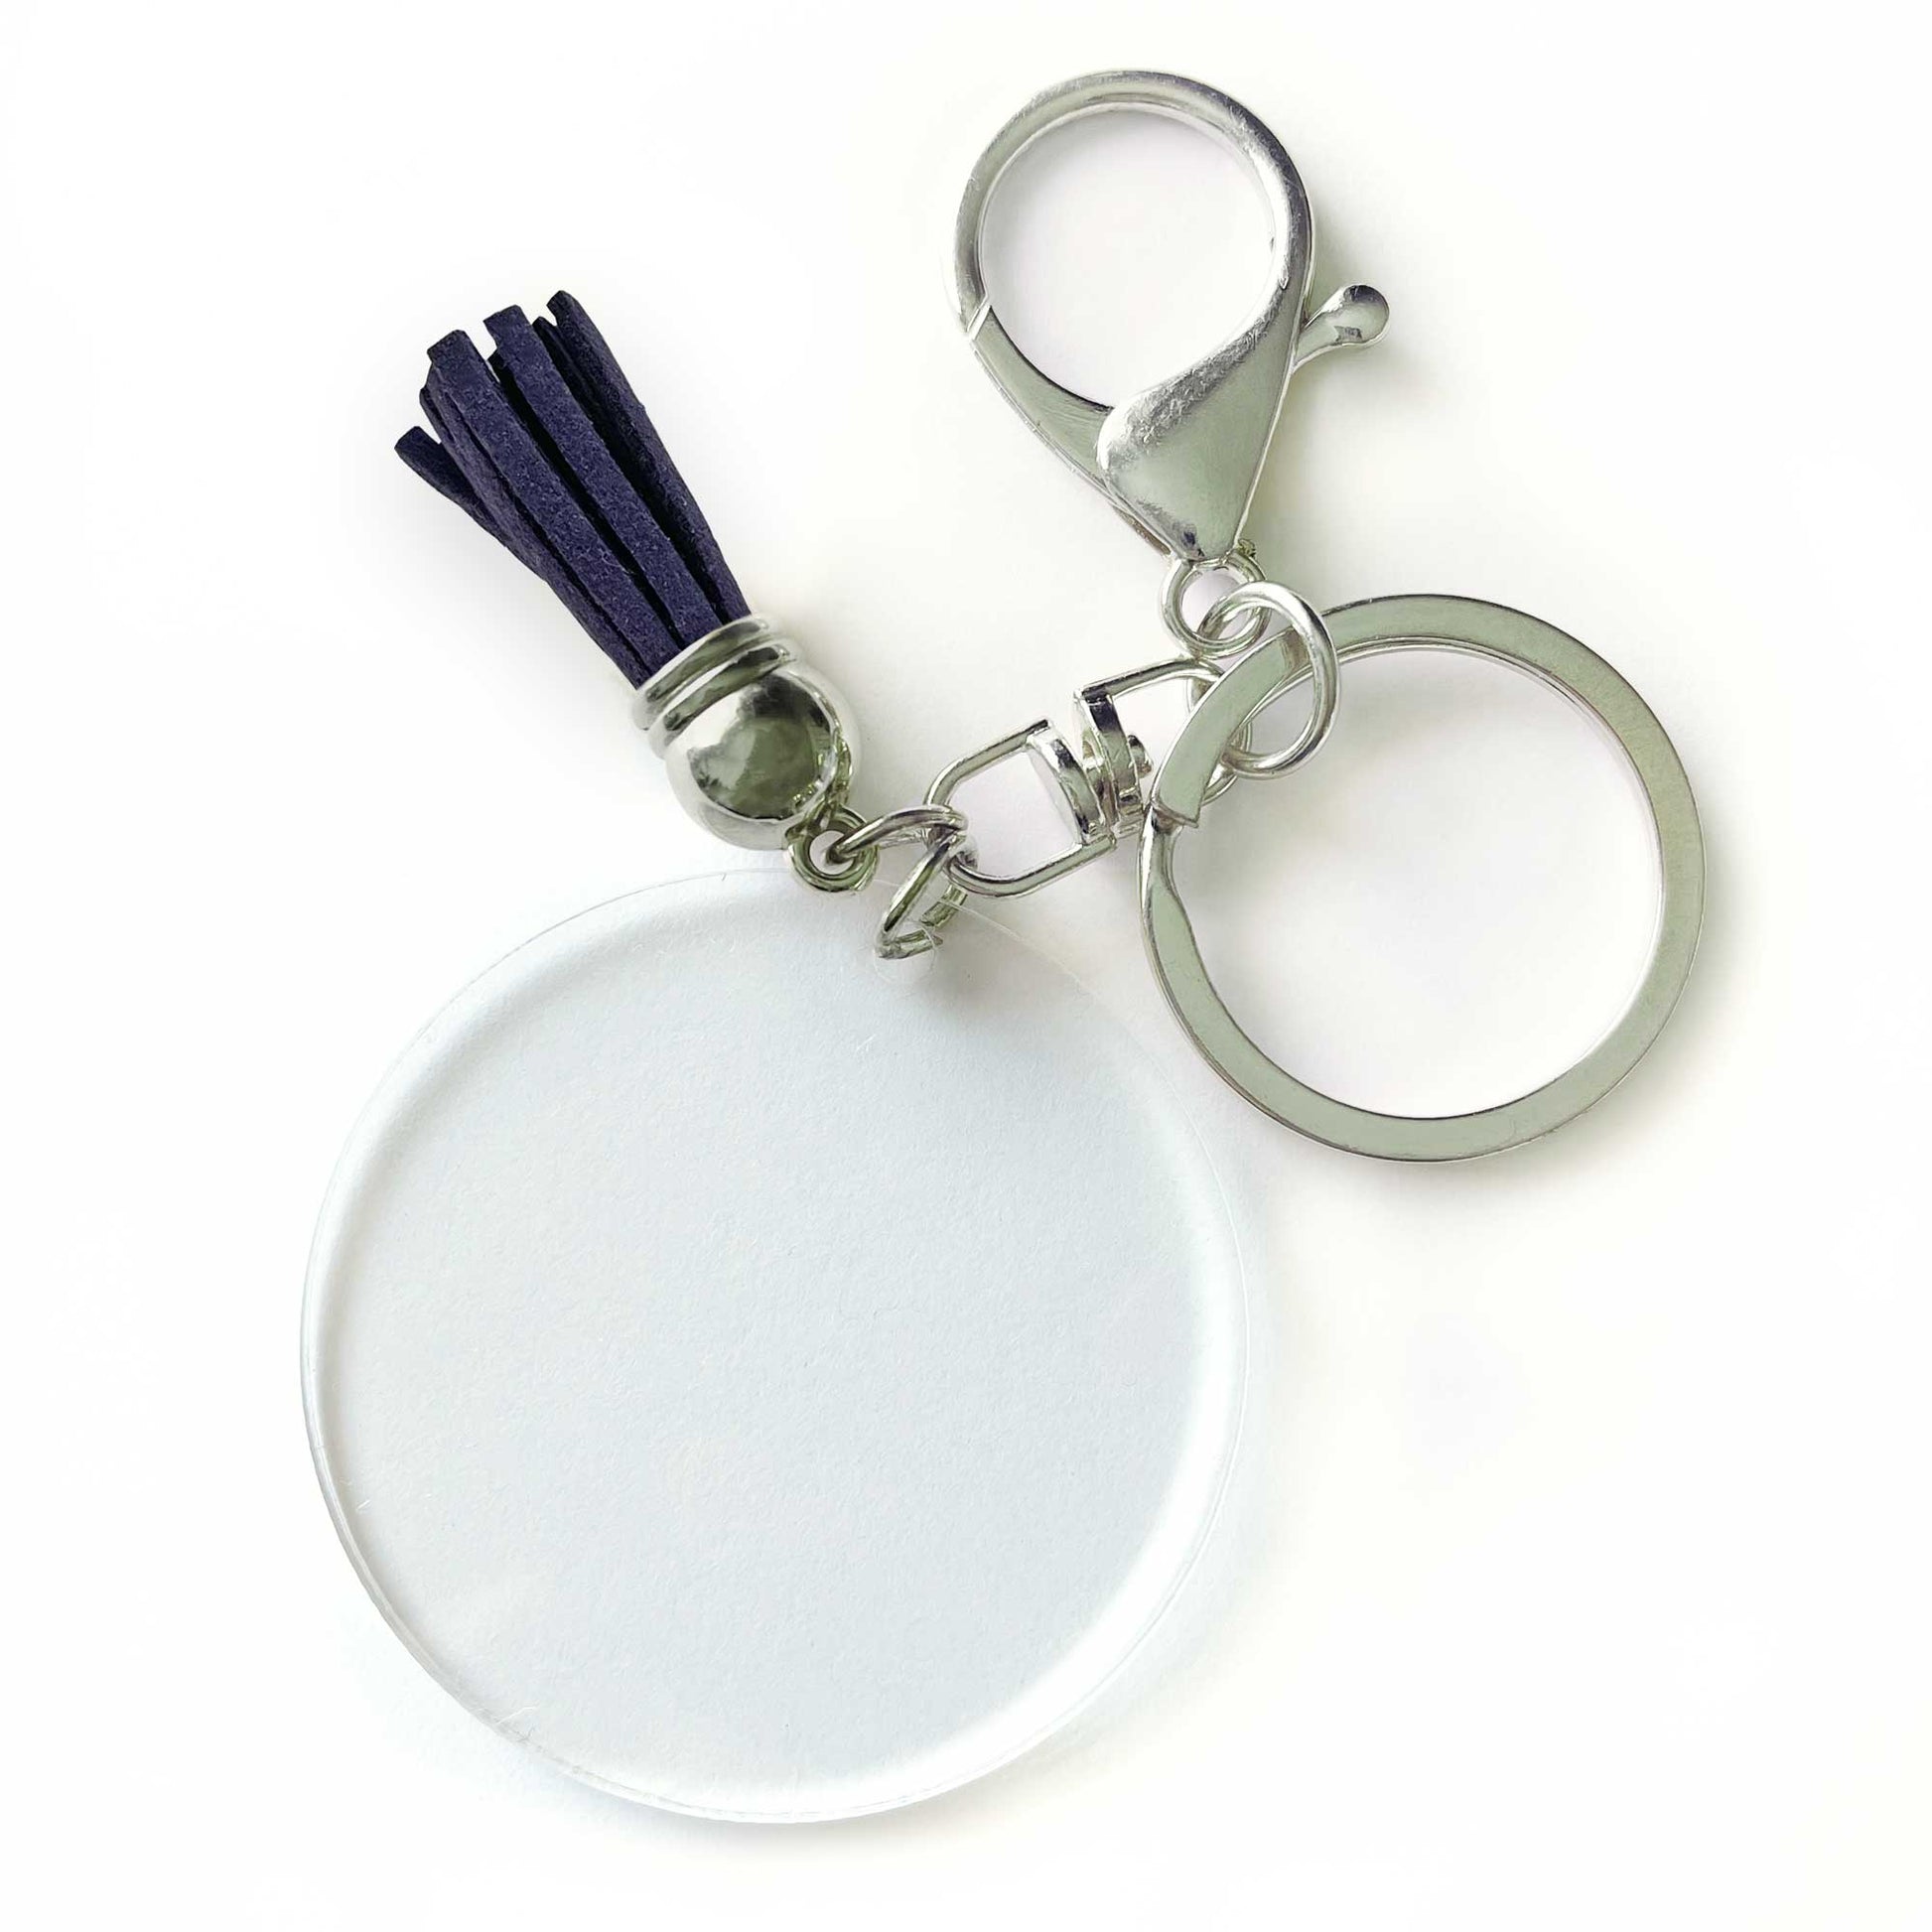 Photo Printed White Sublimation Keychain Round, Size: Normal Size